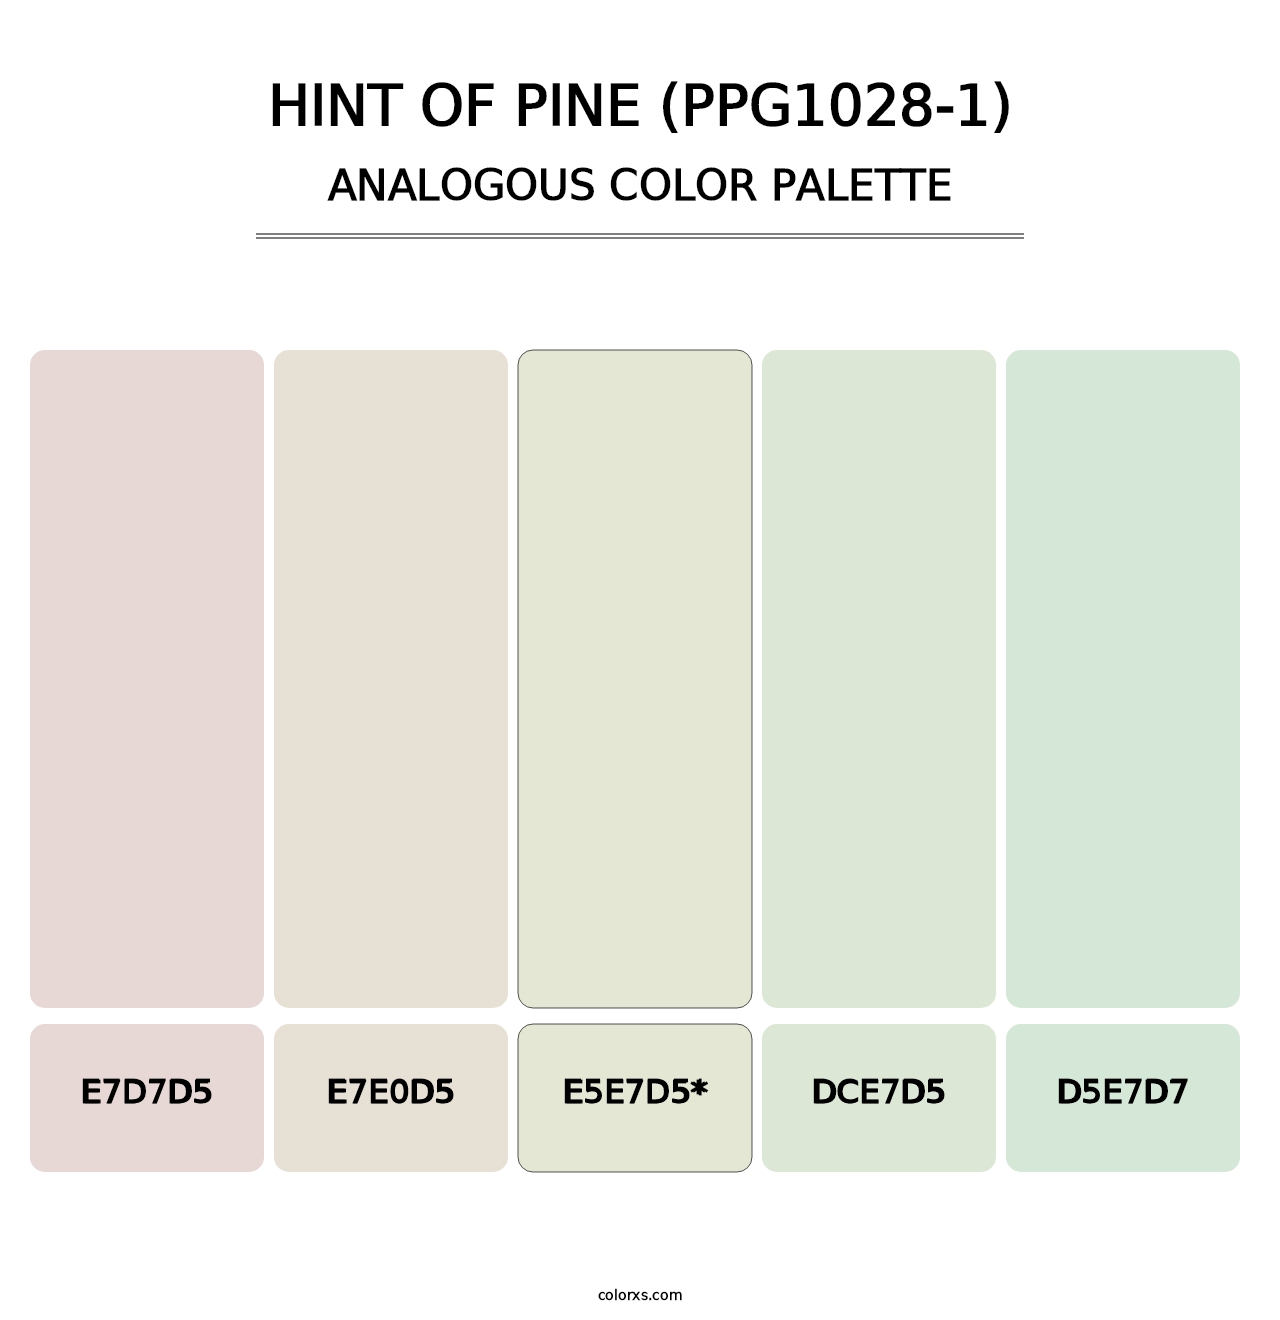 Hint Of Pine (PPG1028-1) - Analogous Color Palette